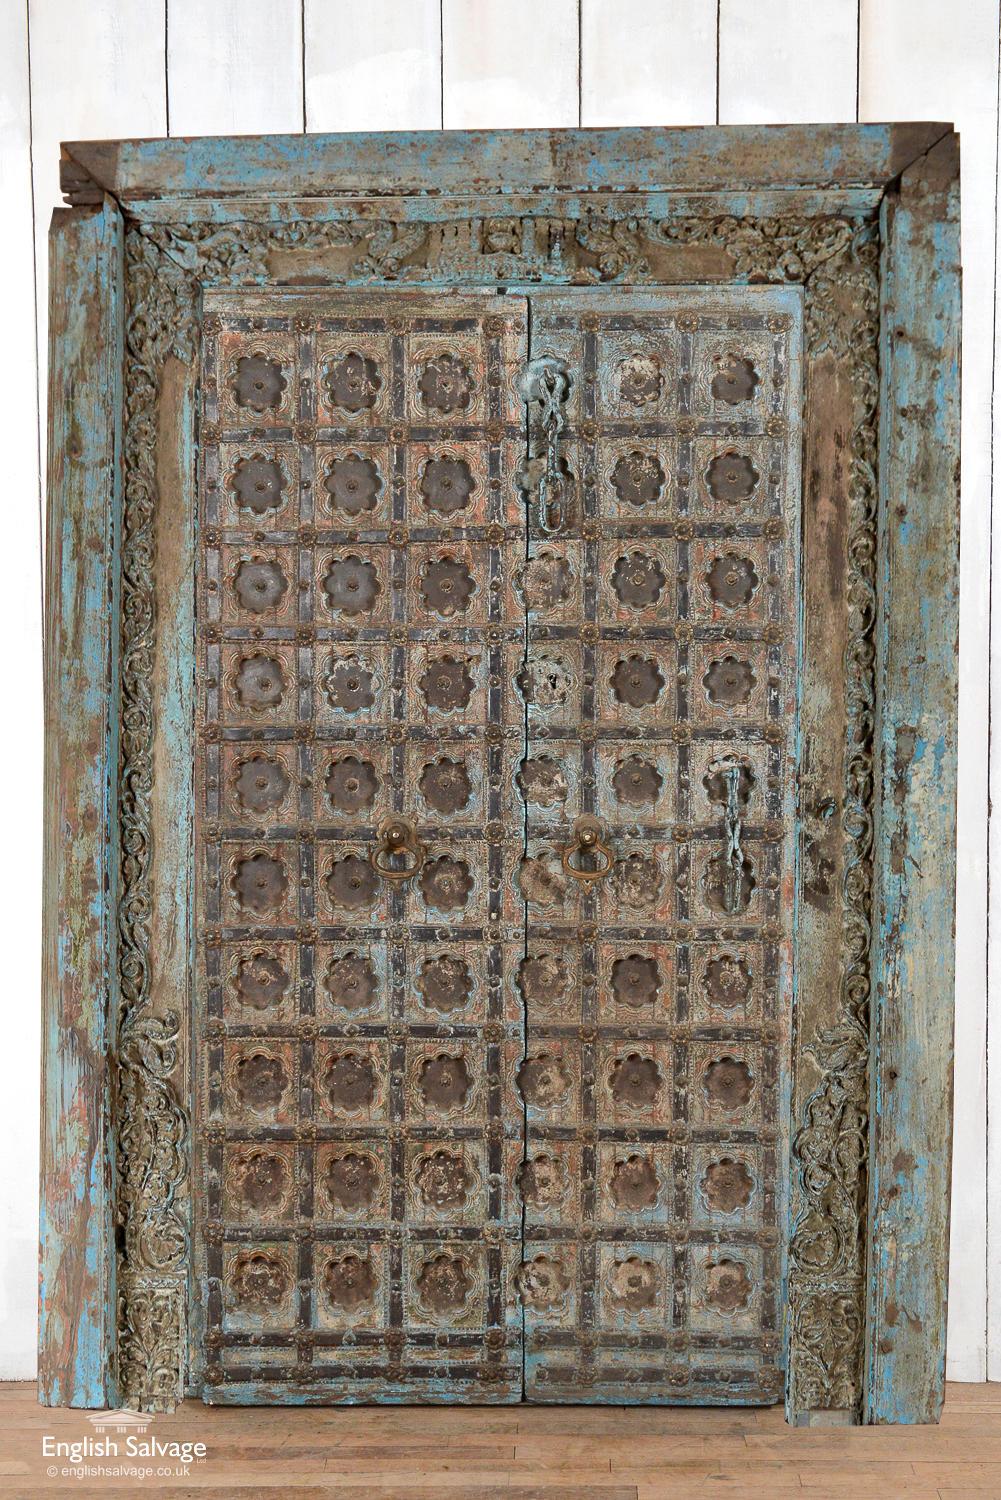 Stunning and unusual pair of antique Indian Jali doors in frame. Overall frame dimensions are given below and doors measure 102cm wide x 190cm high. The doors have ornate heavy brass knockers and brass studs as the centres of the floral motifs. Old